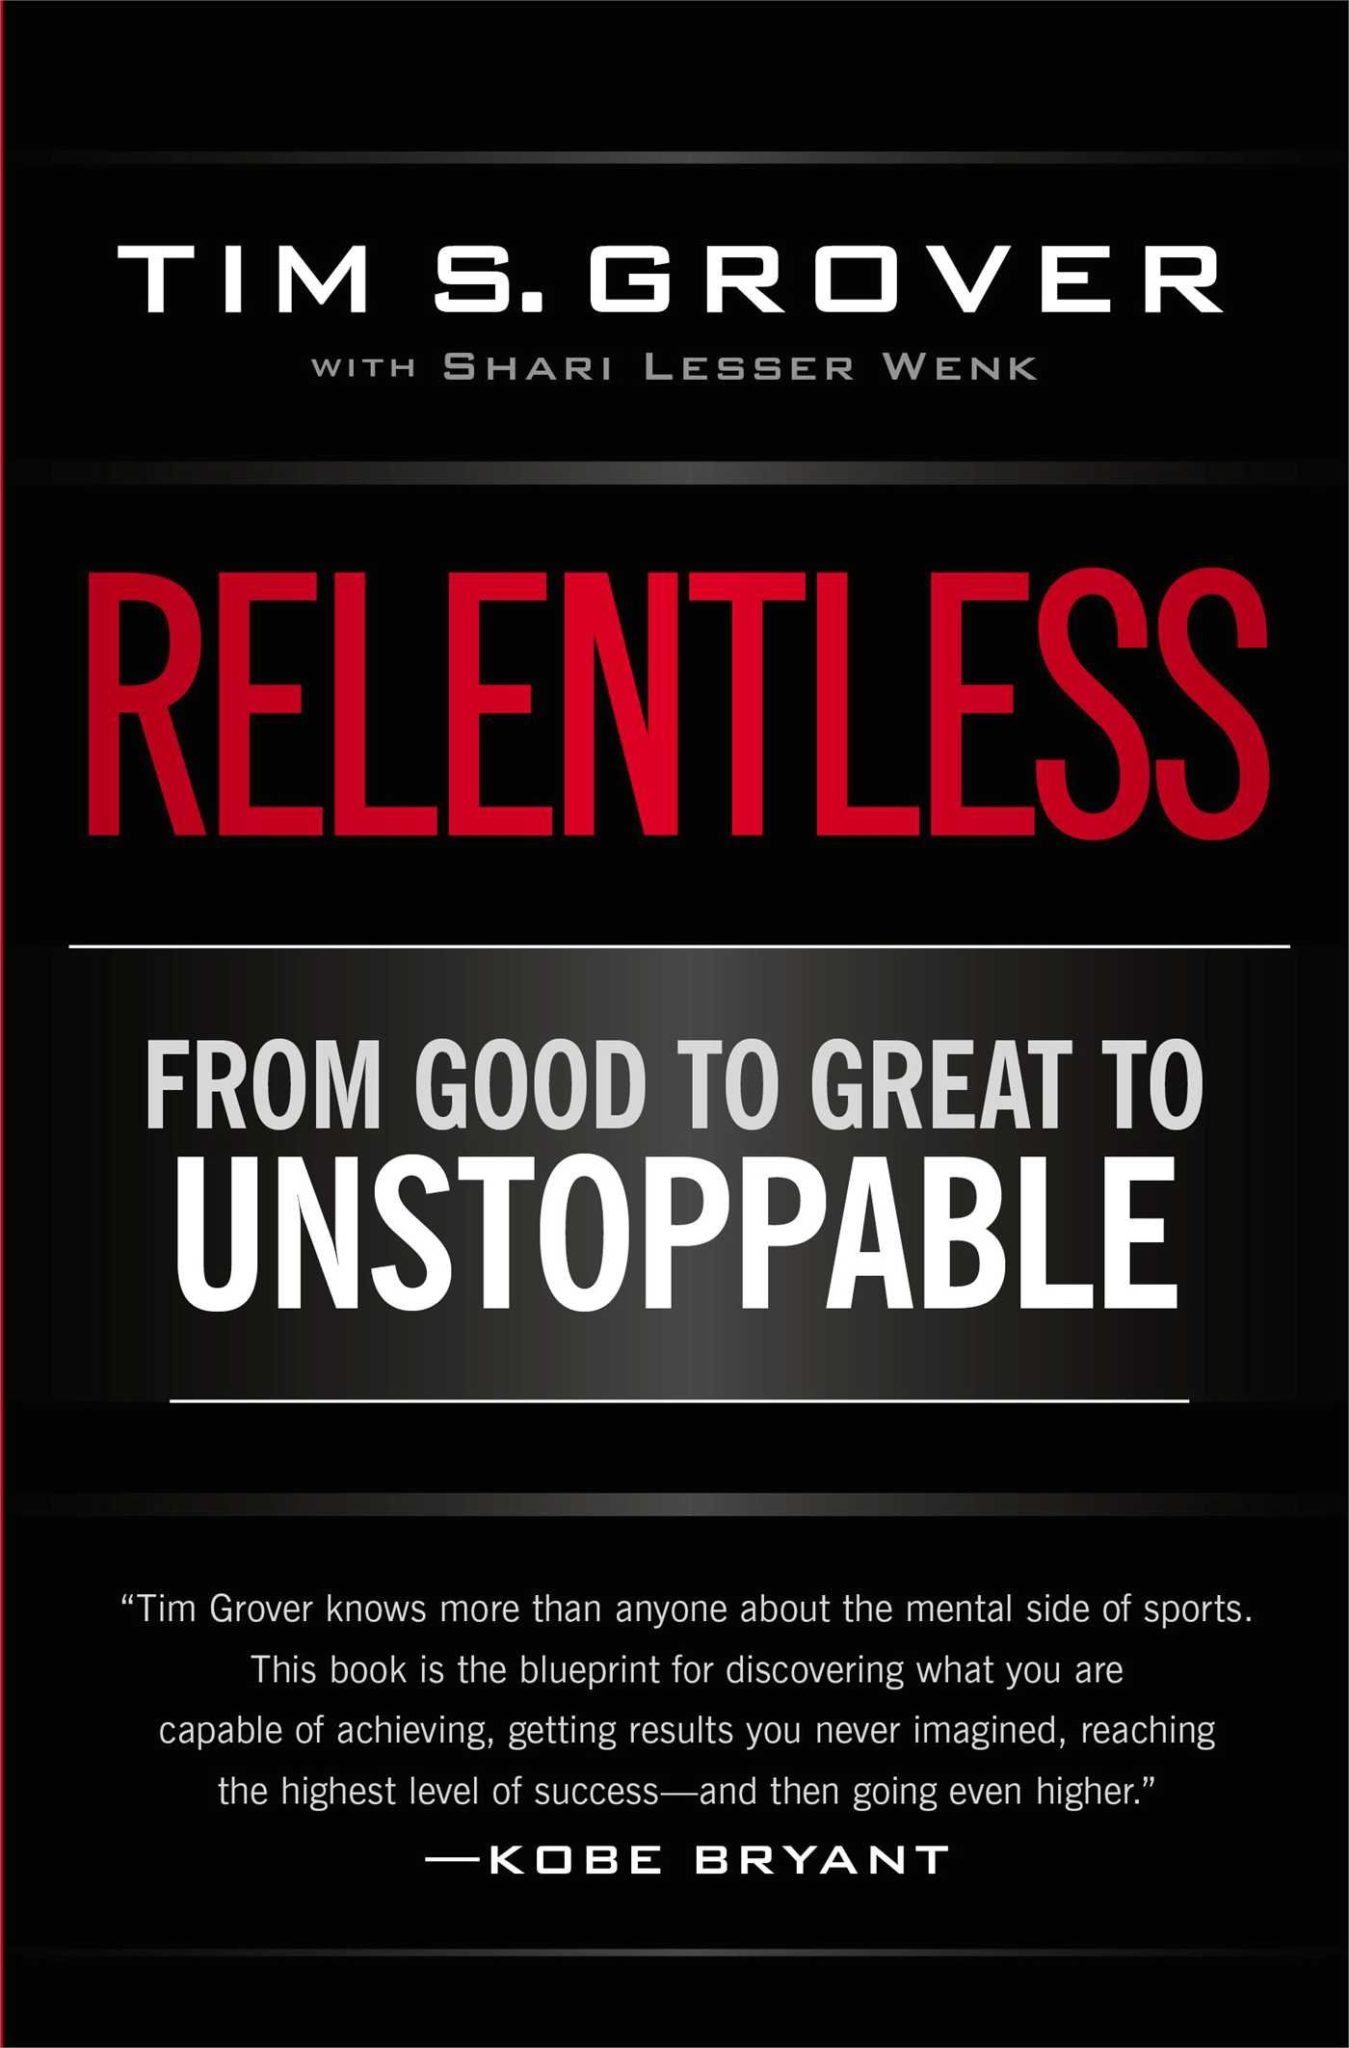 Relentless - From Good to Great to Unstoppable